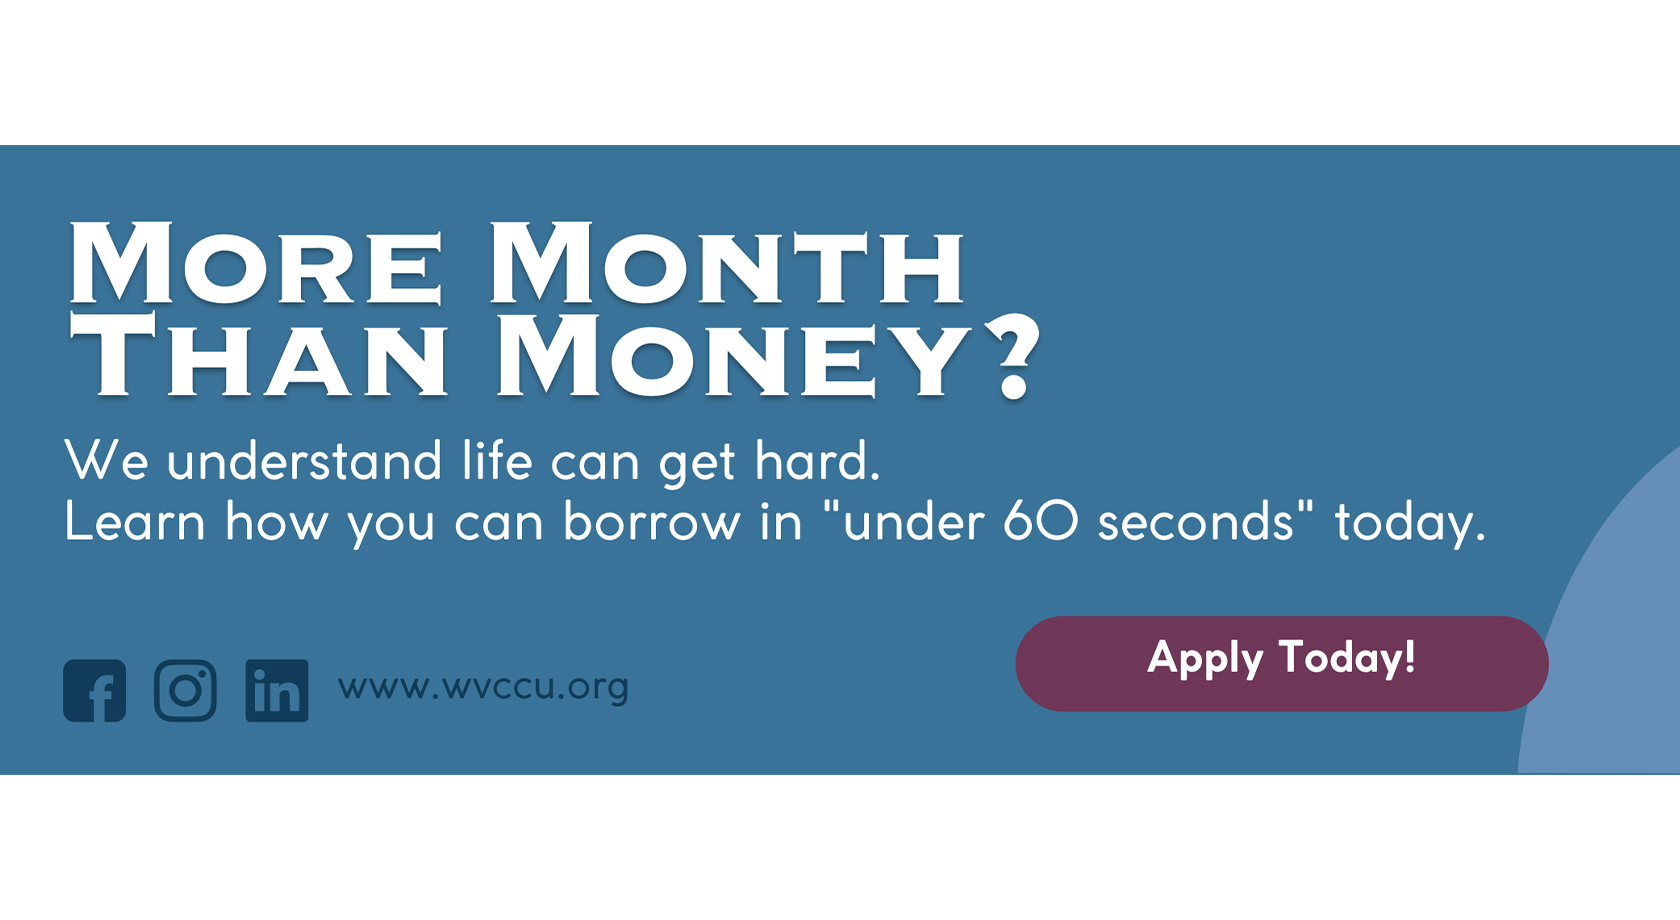 More Month Than Money?
We understand life can get hard. Learn how you can borrow in under 60 seconds today. 
www.wvccu.org
Apply Today